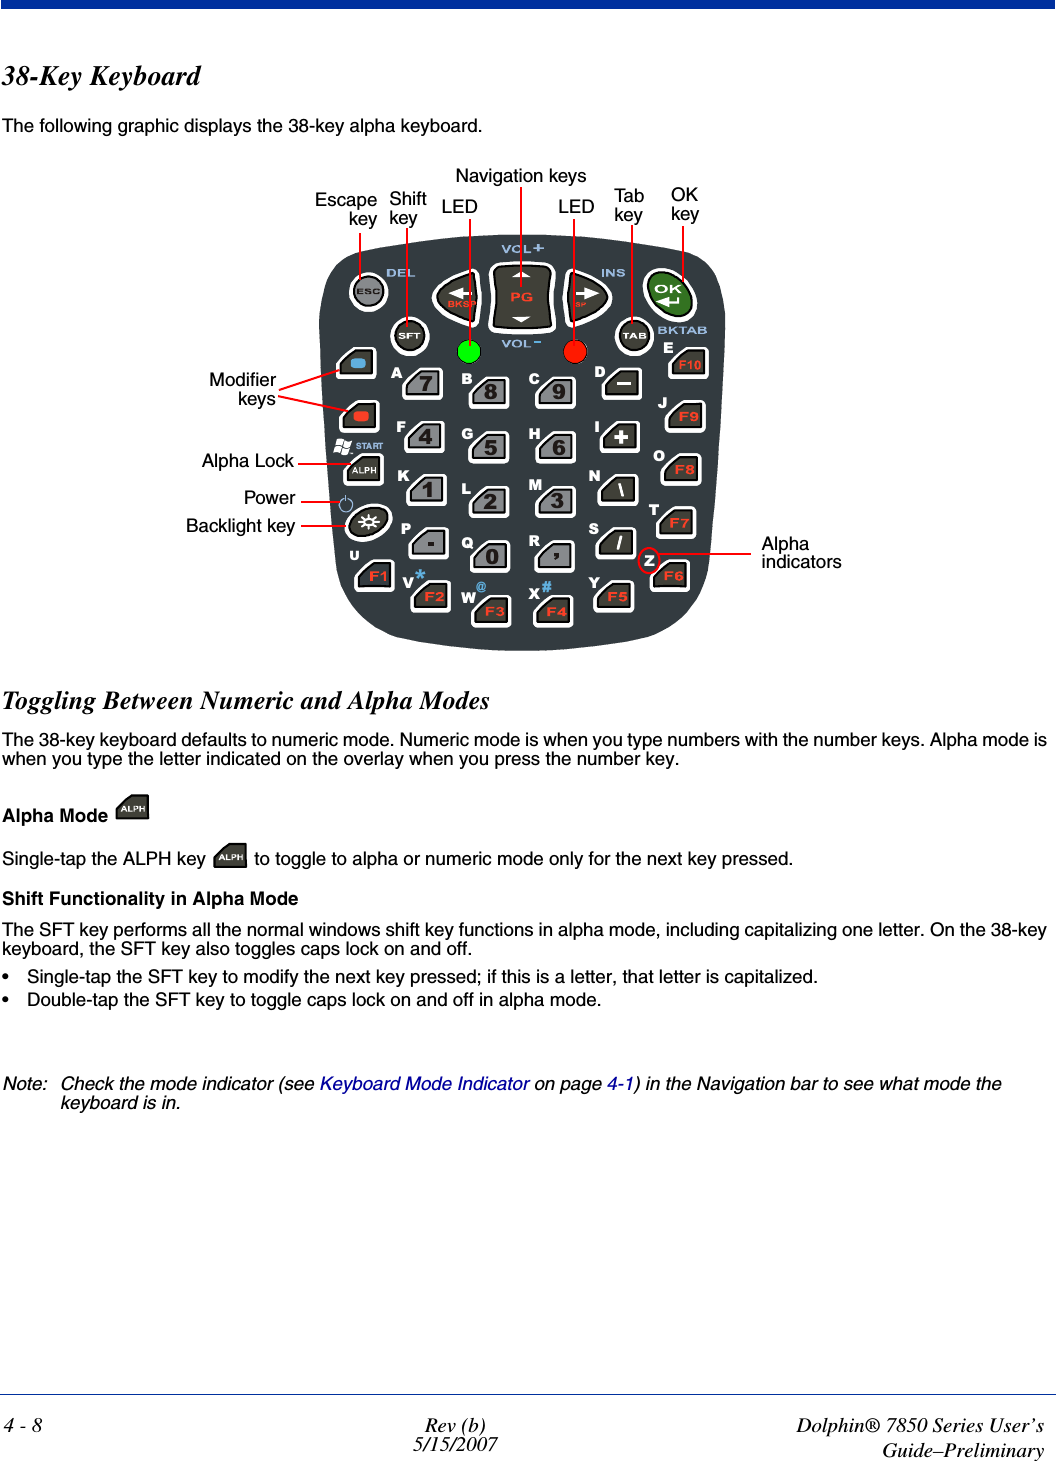 4 - 8 Rev (b)5/15/2007Dolphin® 7850 Series User’sGuide–Preliminary38-Key KeyboardThe following graphic displays the 38-key alpha keyboard.Toggling Between Numeric and Alpha Modes The 38-key keyboard defaults to numeric mode. Numeric mode is when you type numbers with the number keys. Alpha mode is when you type the letter indicated on the overlay when you press the number key. Alpha Mode Single-tap the ALPH key   to toggle to alpha or numeric mode only for the next key pressed. Shift Functionality in Alpha ModeThe SFT key performs all the normal windows shift key functions in alpha mode, including capitalizing one letter. On the 38-key keyboard, the SFT key also toggles caps lock on and off.• Single-tap the SFT key to modify the next key pressed; if this is a letter, that letter is capitalized.• Double-tap the SFT key to toggle caps lock on and off in alpha mode.Note: Check the mode indicator (see Keyboard Mode Indicator on page 4-1) in the Navigation bar to see what mode the keyboard is in.+\/3690258741OBEJUACDFGHIKLMNQSTVWXYZSTARTP#*@REscapekeyPowerBacklight keyOK keyNavigation keysTab keyAlpha indicators ModifierkeysShift key LED LEDAlpha Lock